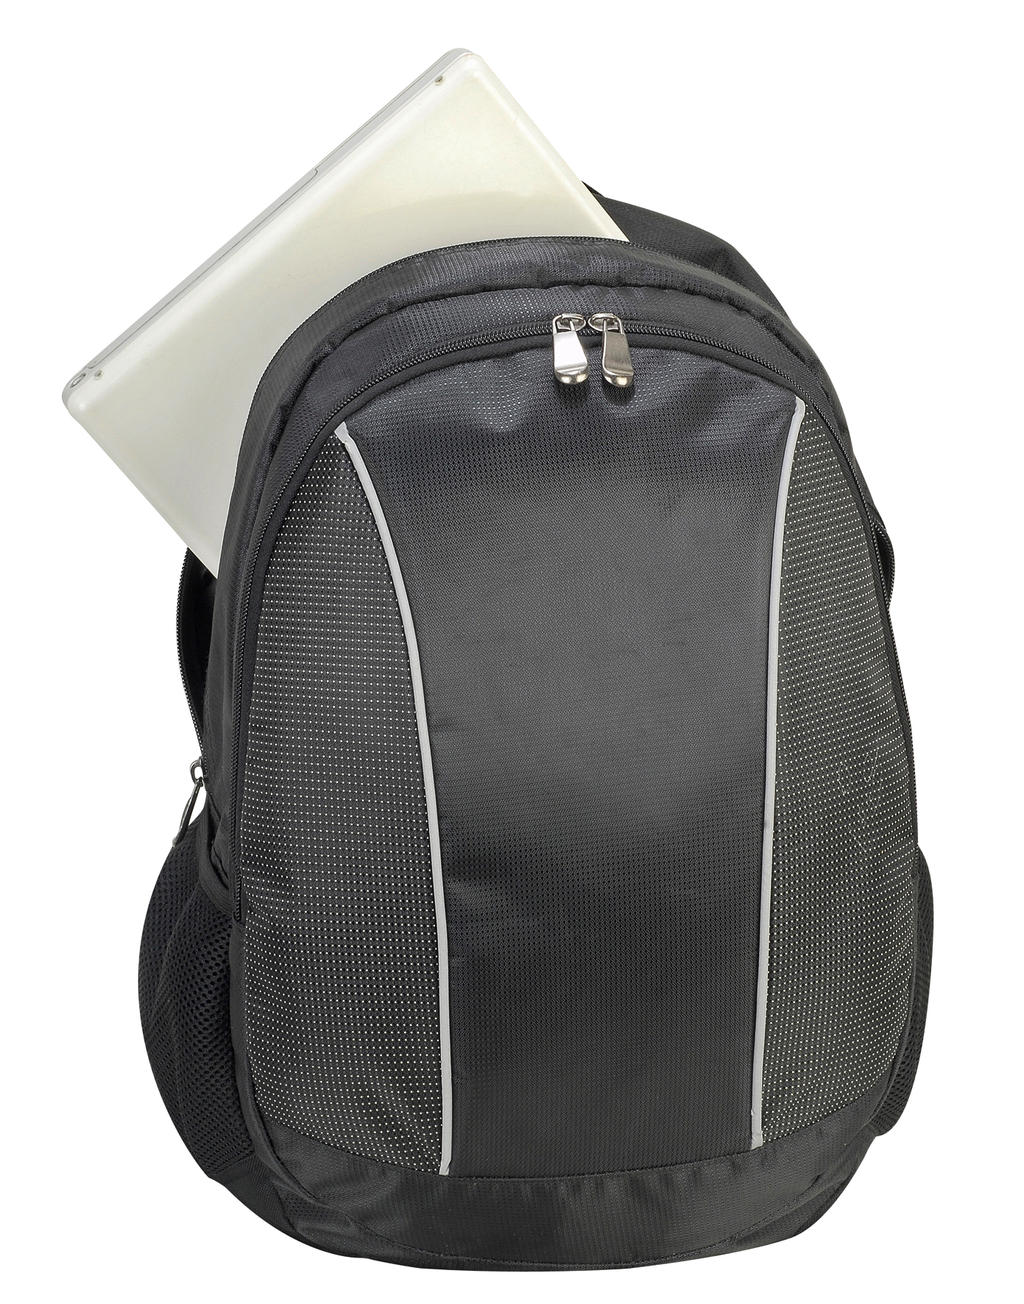  Zurich Classic Laptop Backpack in Farbe Black